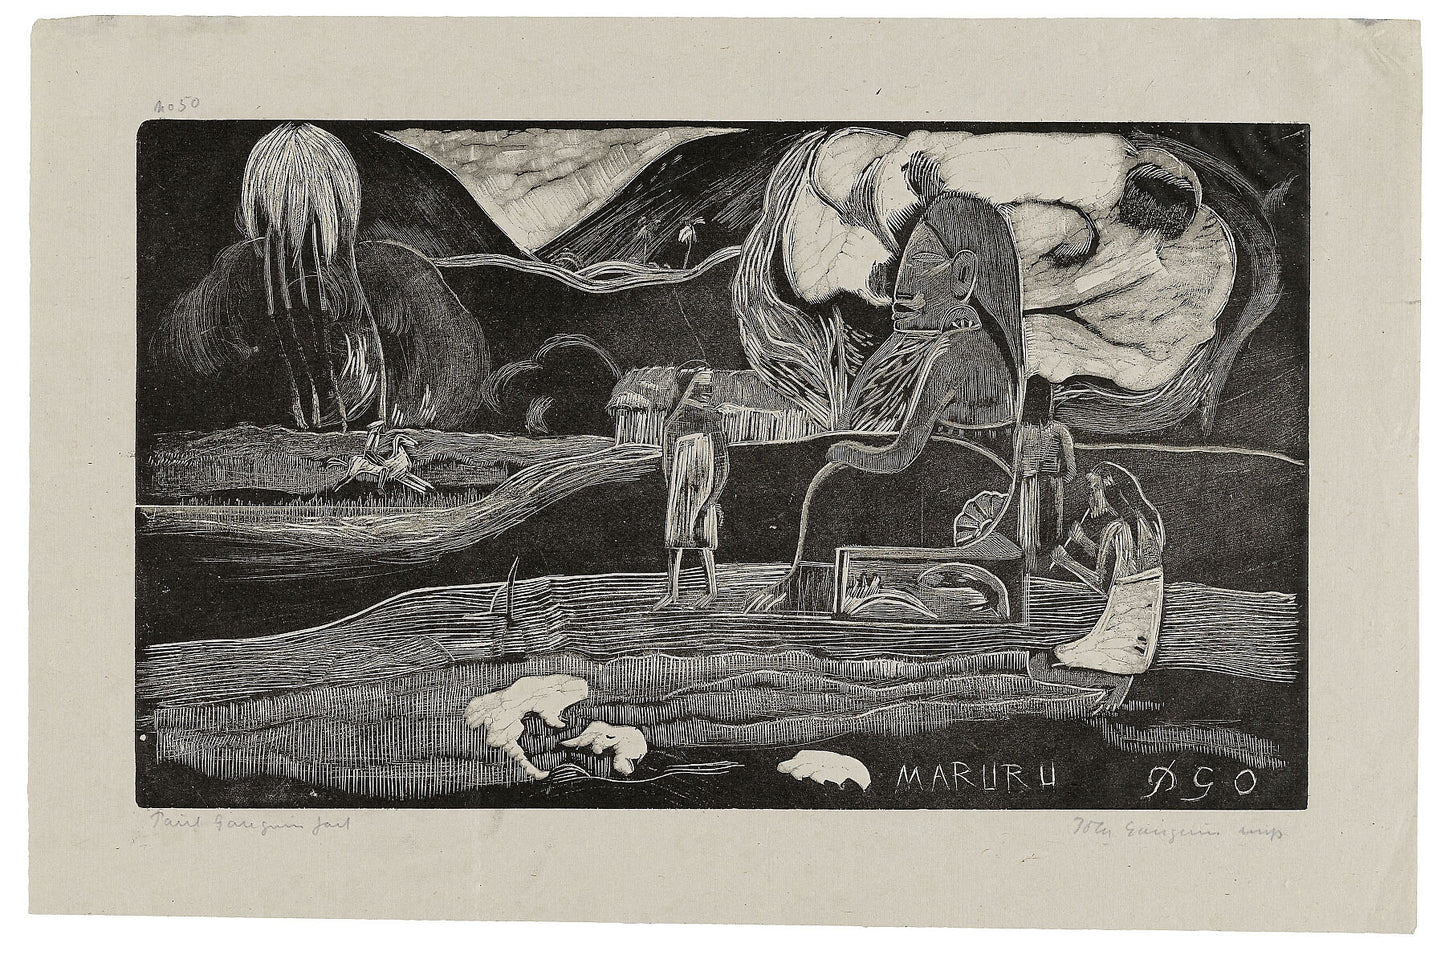 Maruru (Offerings of Gratitude), from the Noa Noa Suite - 1893–94 printed and published in 1921 - by Paul Gauguin.